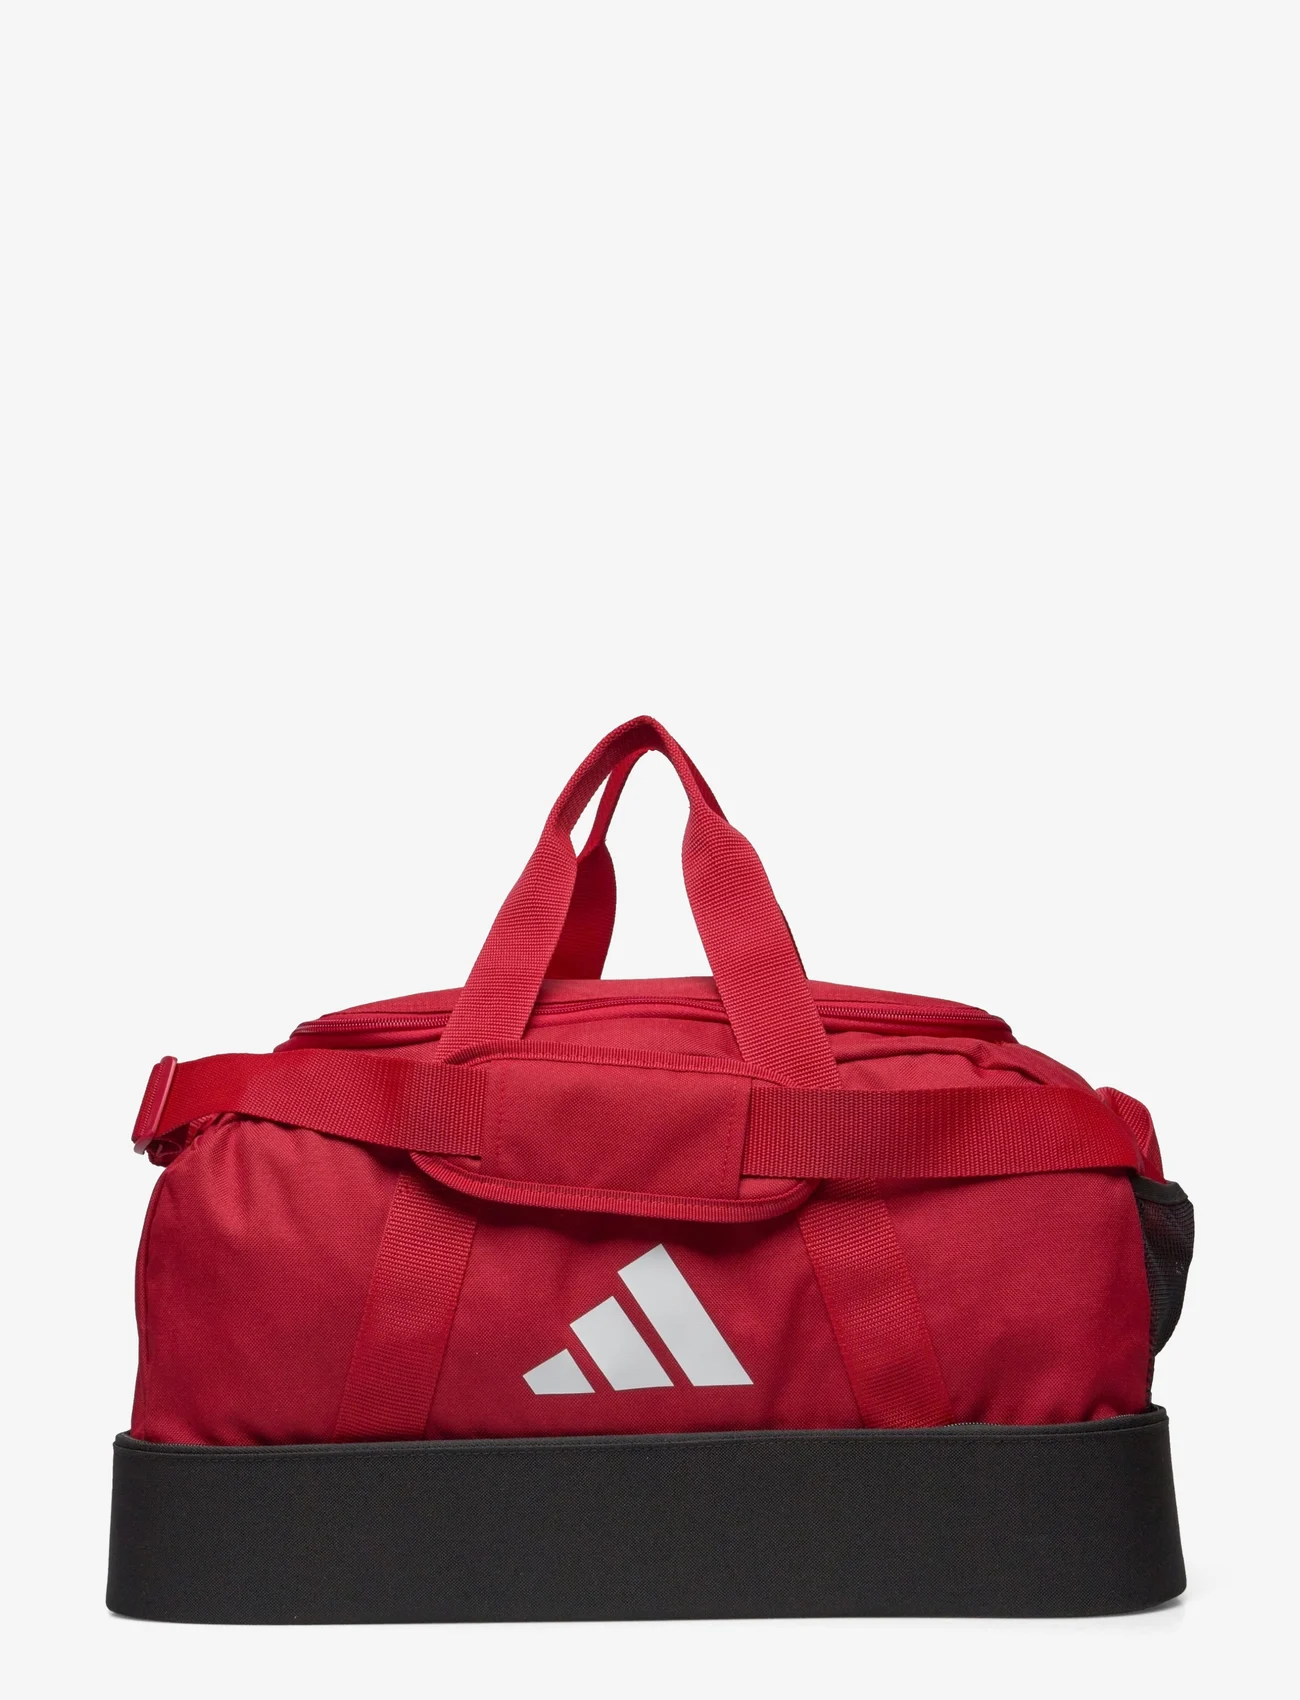 adidas Performance - TIRO LEAGUE DUFFLE BAG SMALL WITH BOTTOM COMPARTMENT - lowest prices - tepore/black/white - 0